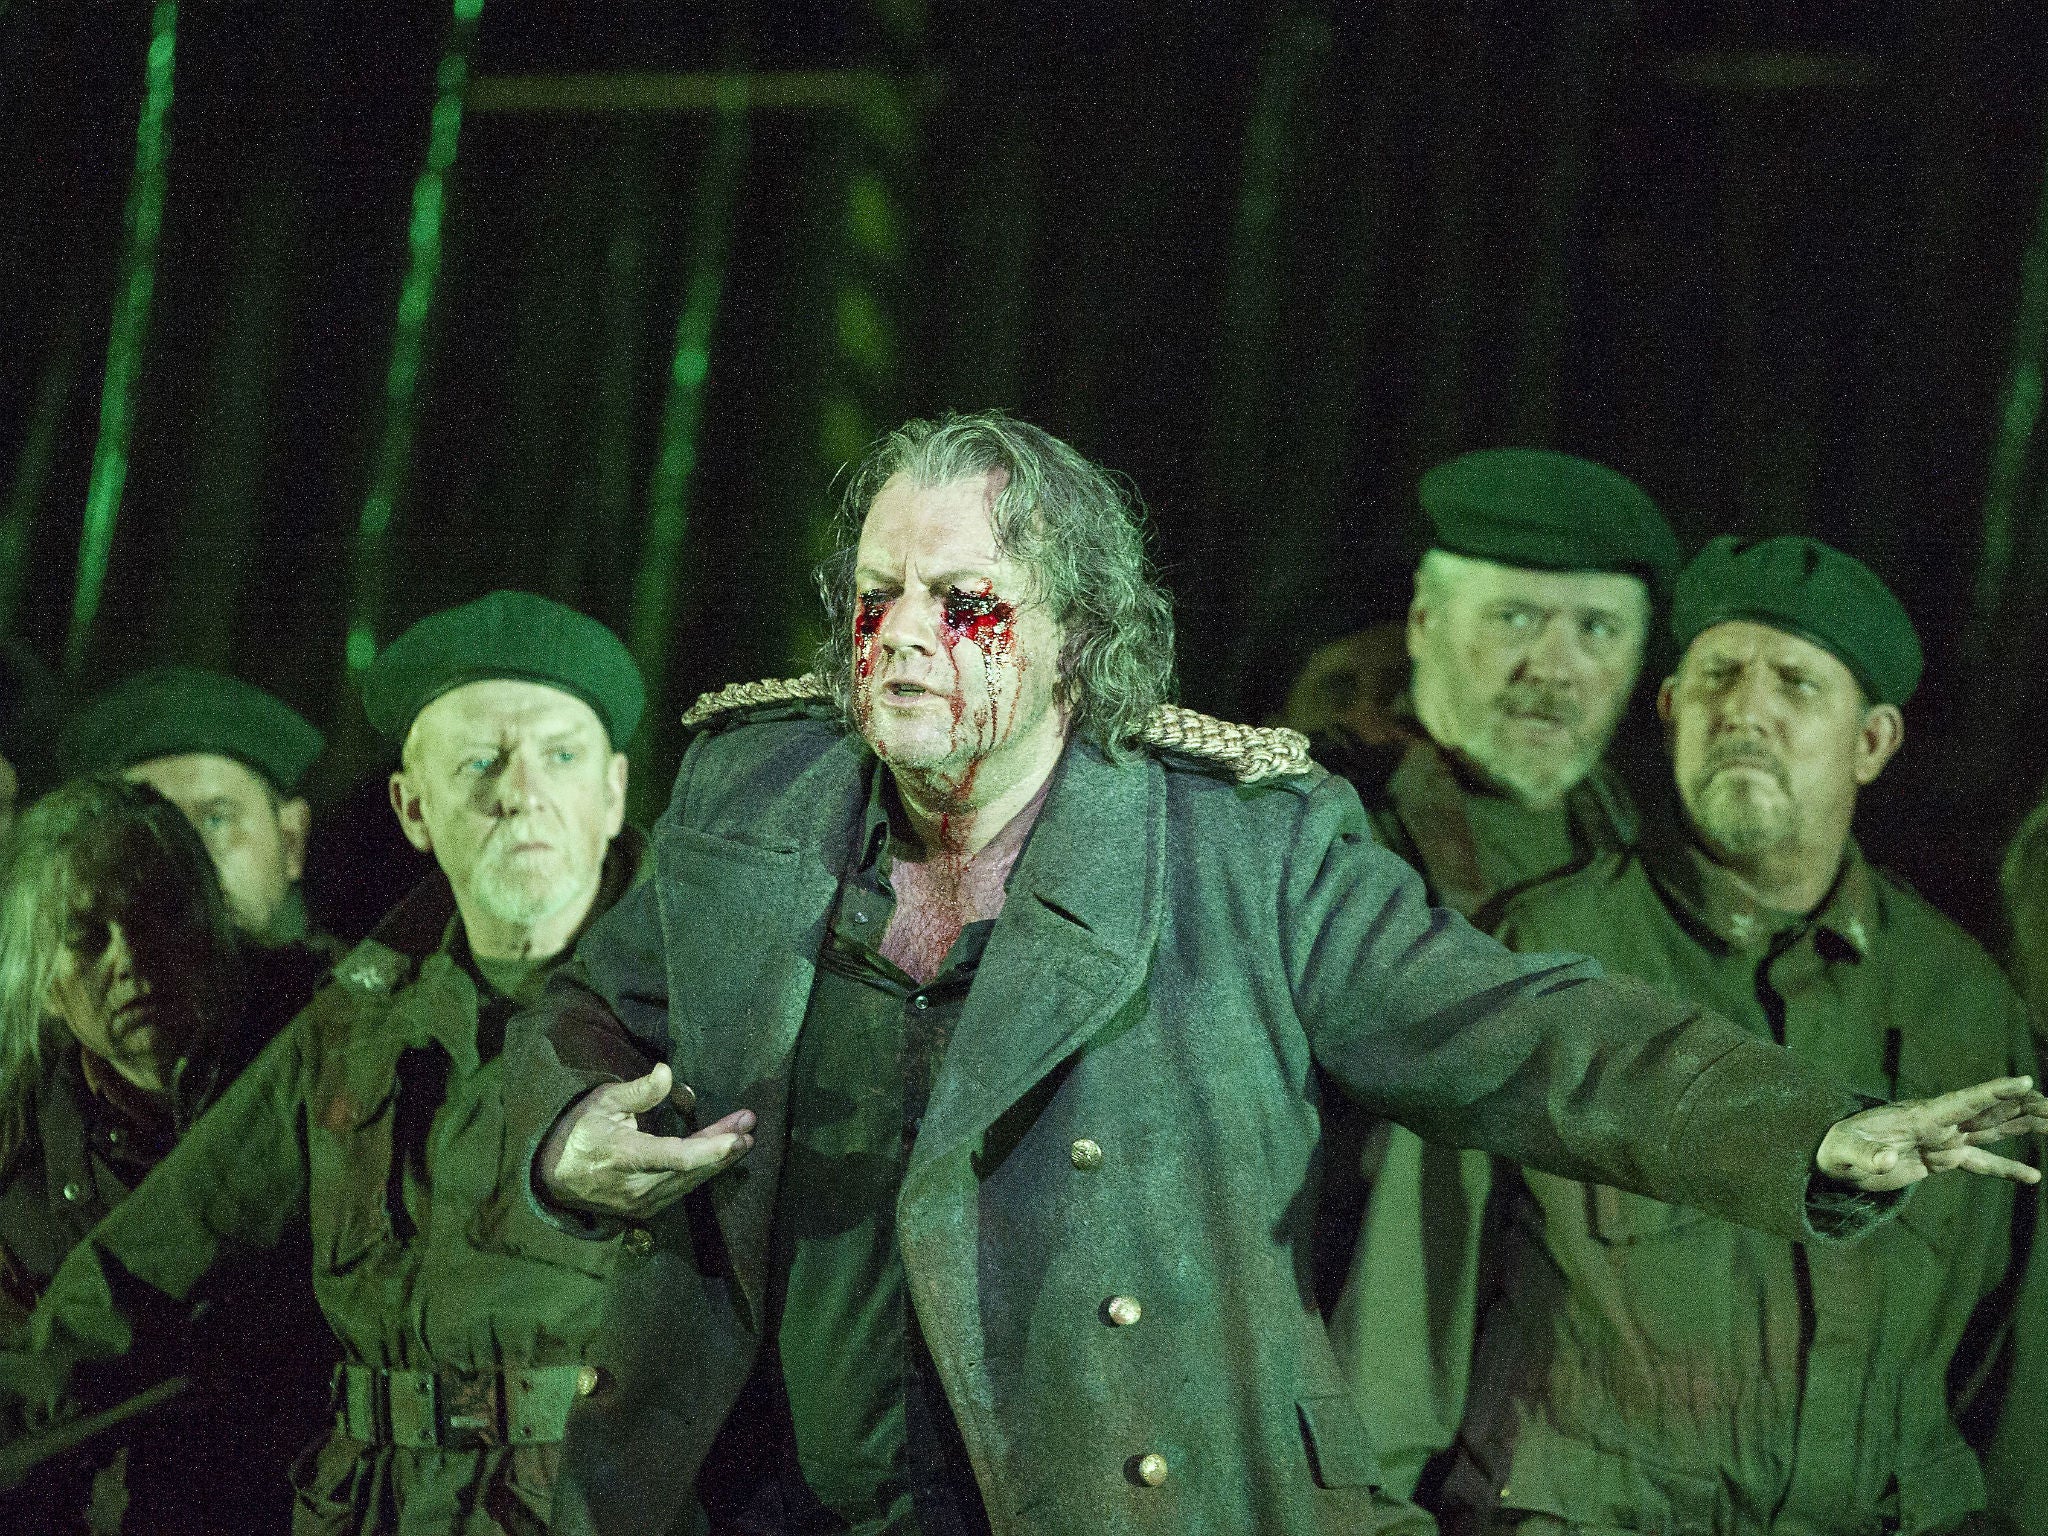 'Oedipe' Opera by George Enescu performed at the Royal Opera House